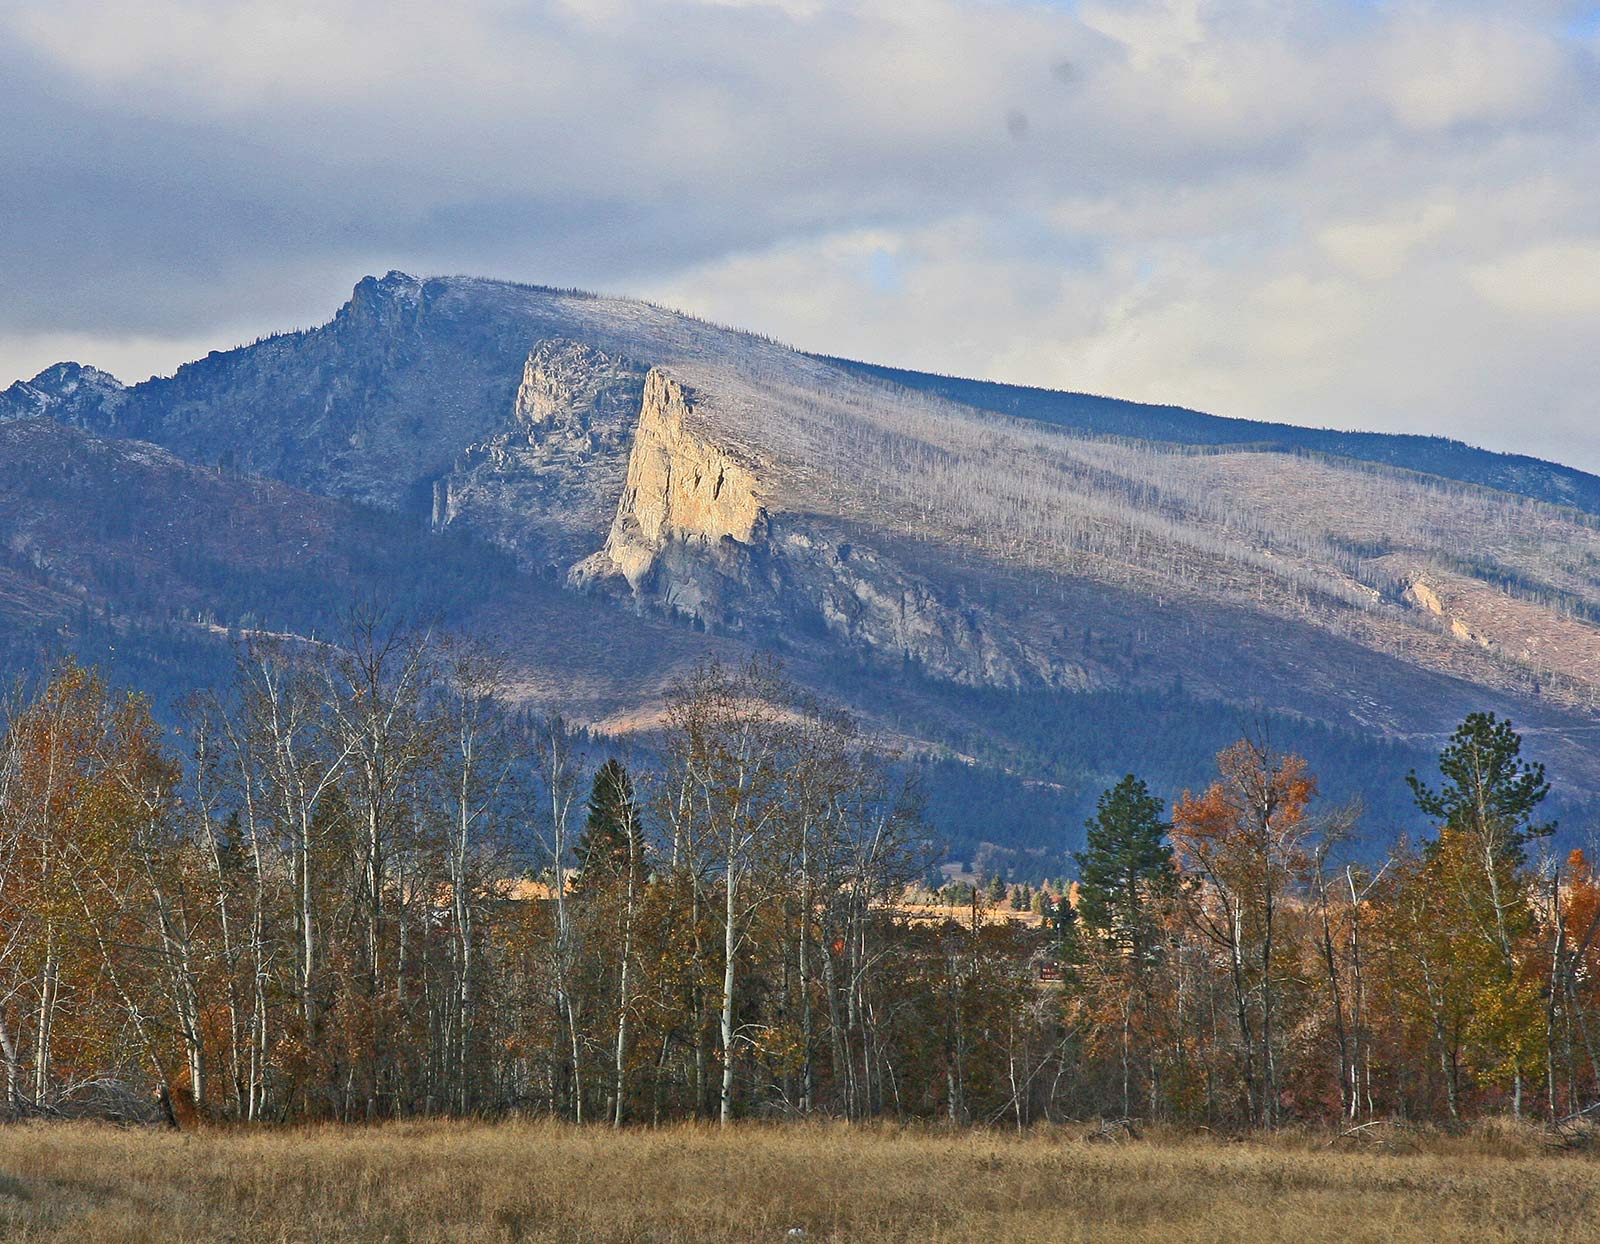 Mountains in the Bitterroot Valley along the Bitterroot Trail